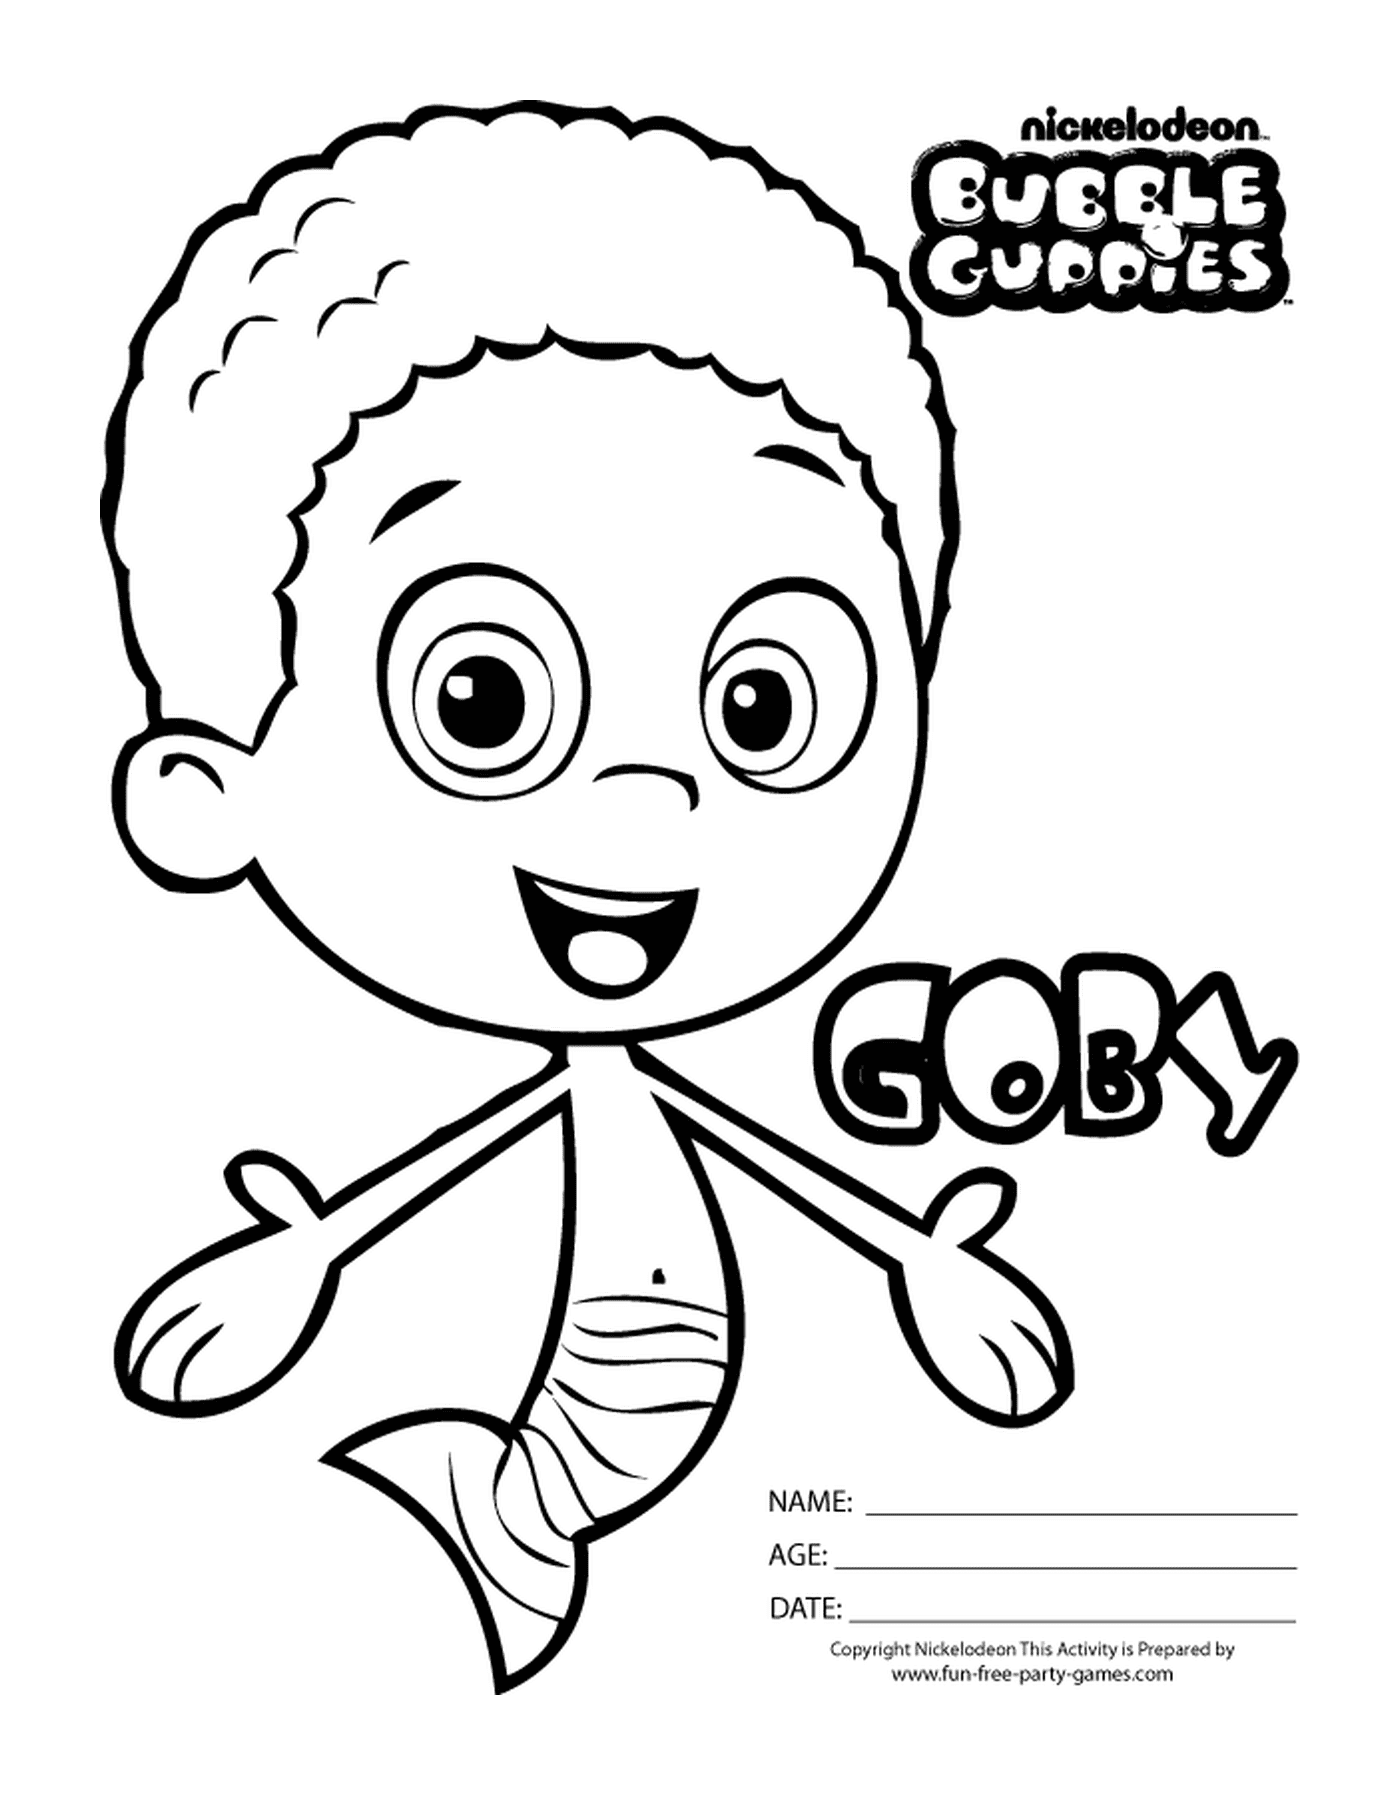  Goby of the Bubble Guppies with a fish tail 